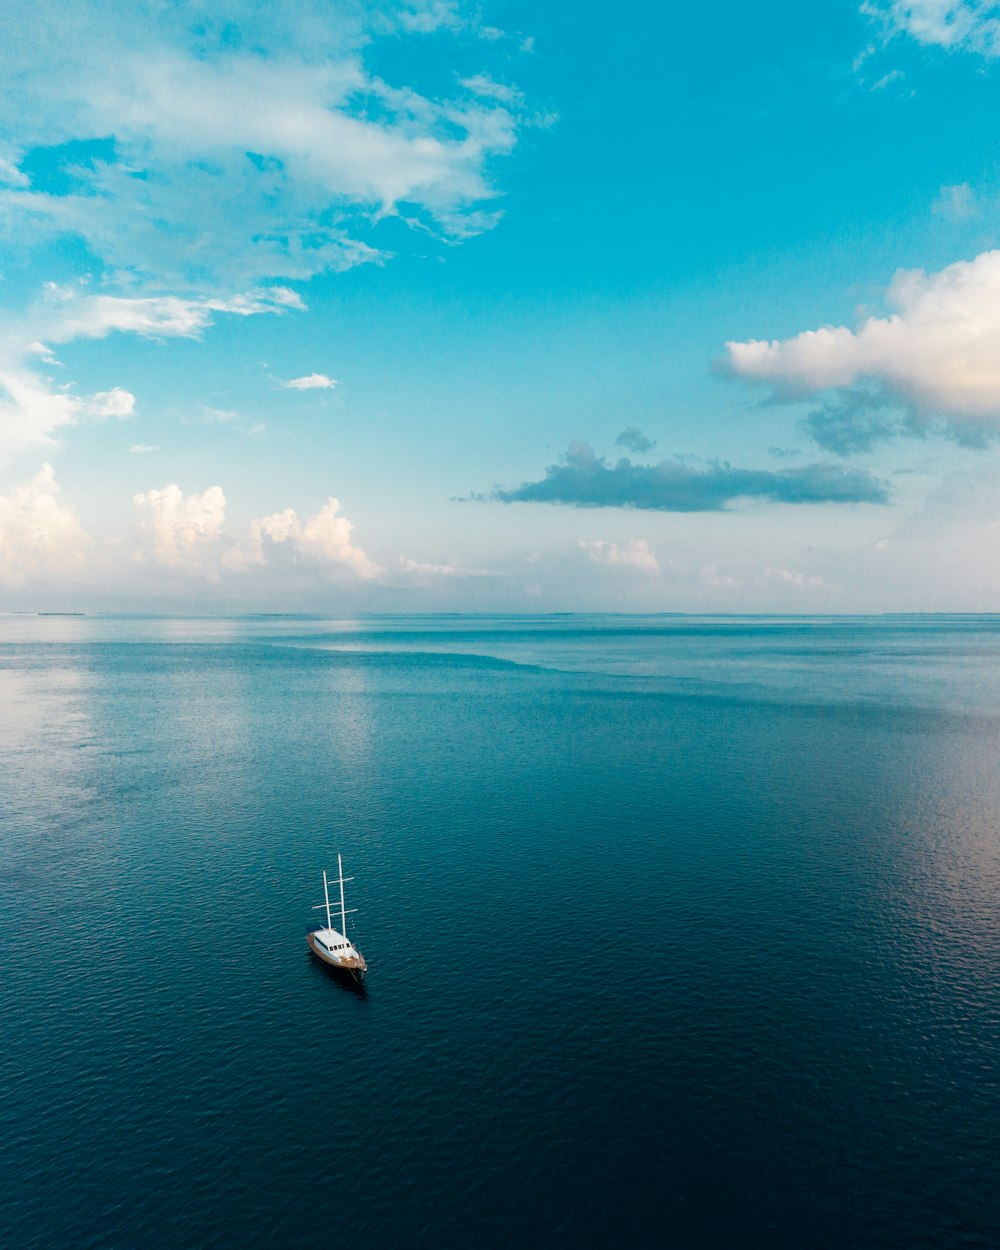 white boat on blue sea under blue sky and white clouds during daytime photo  – Free Nature Image on Unsplash